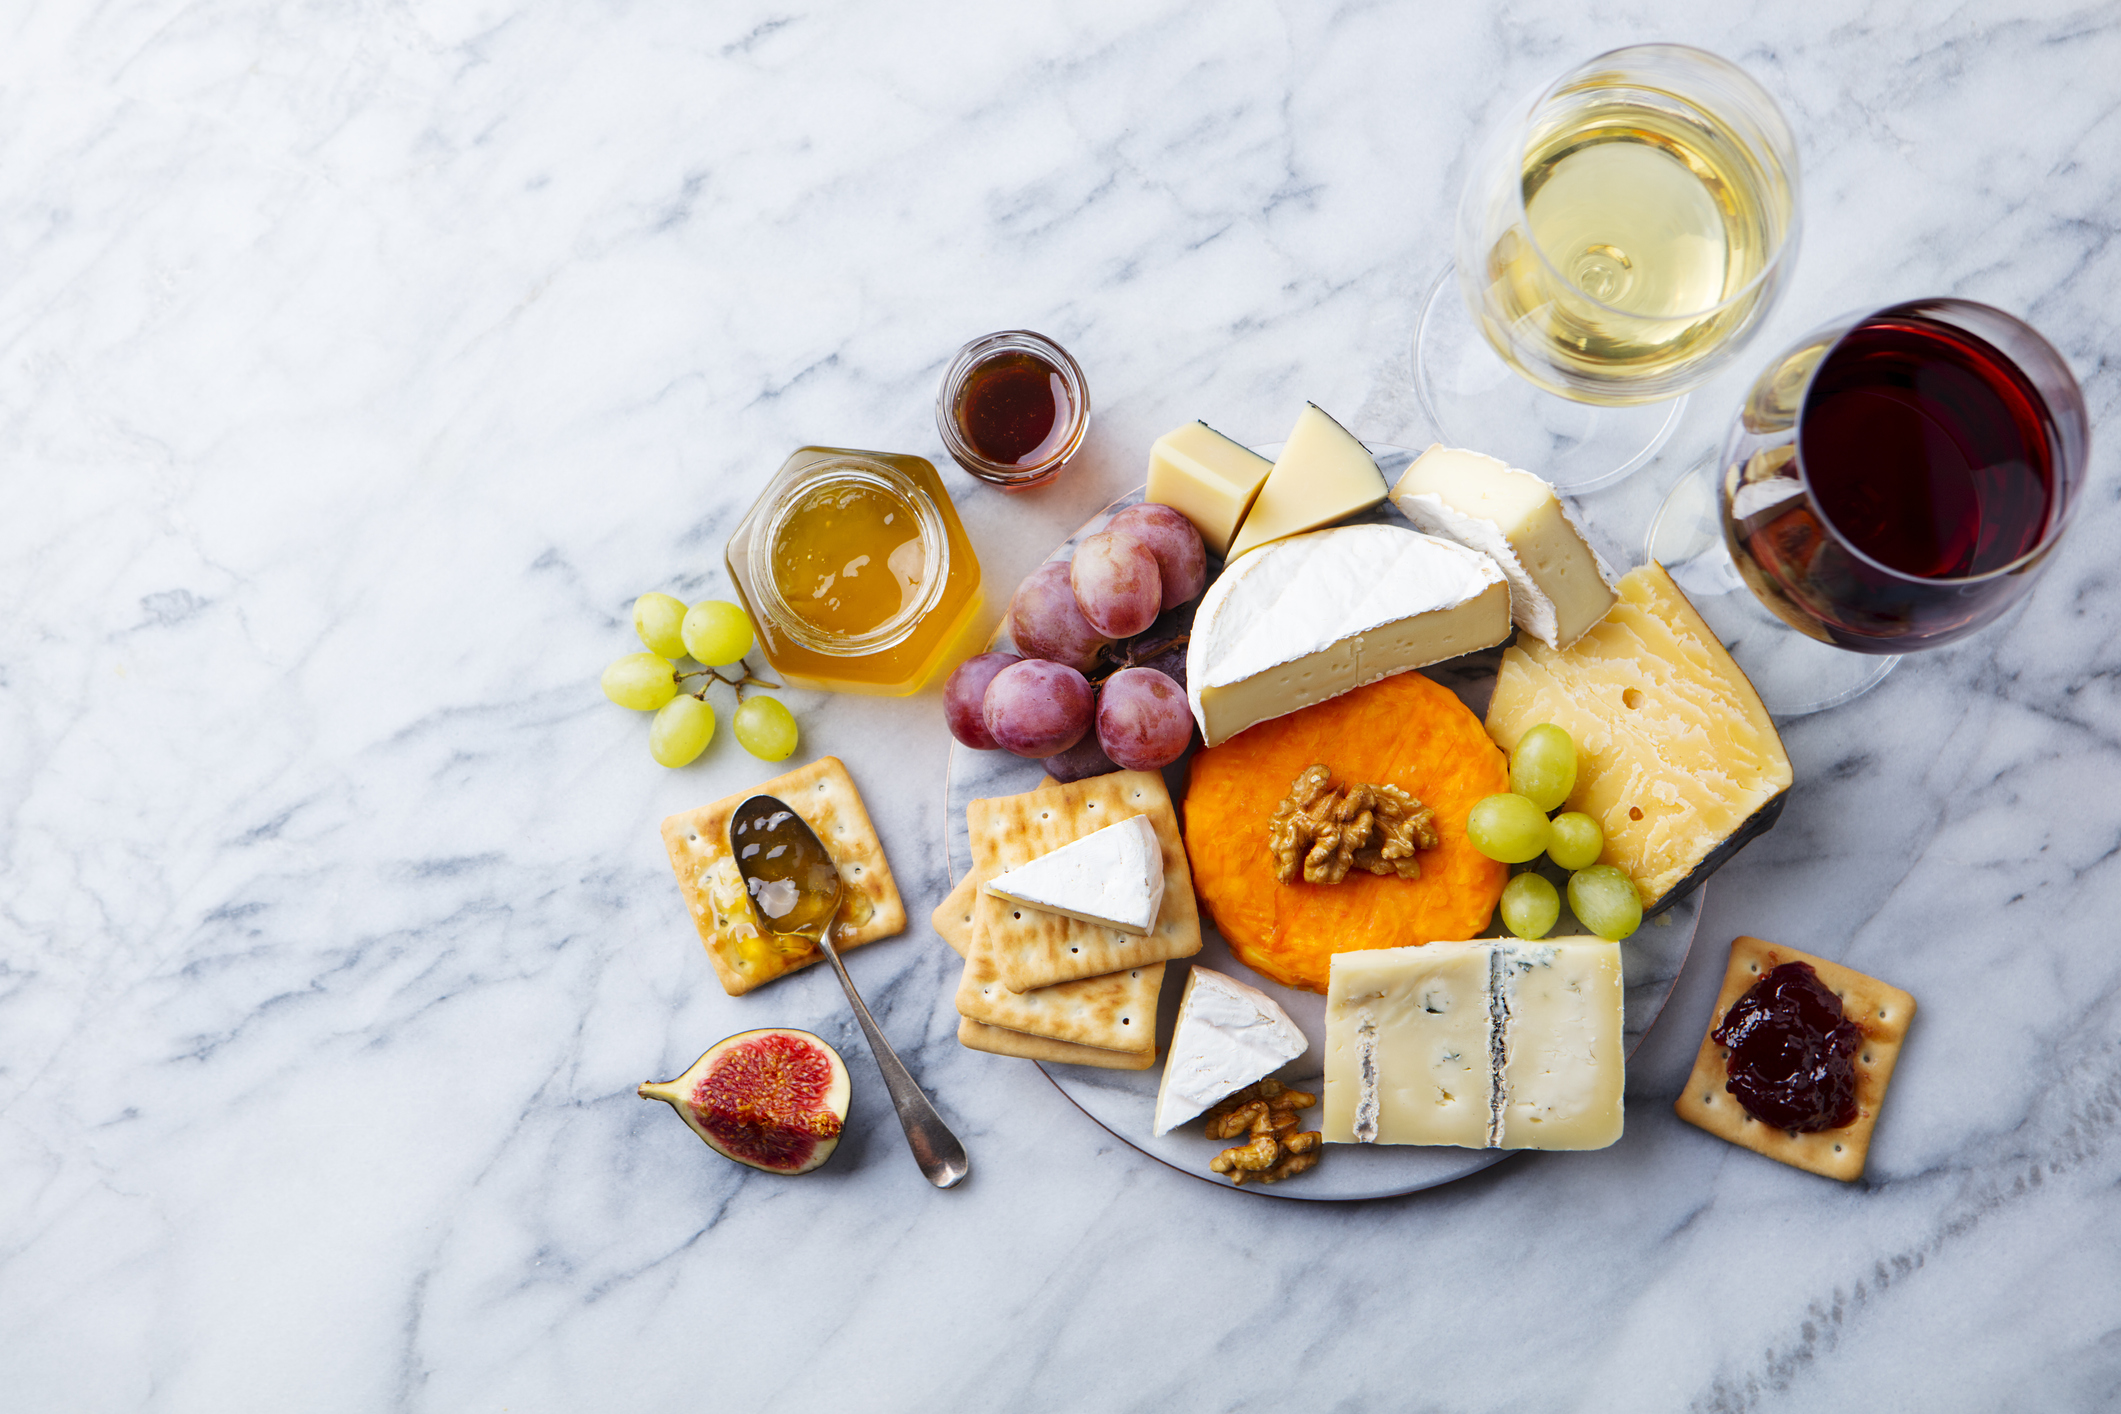 What more wine and cheese can do for your cognitive health